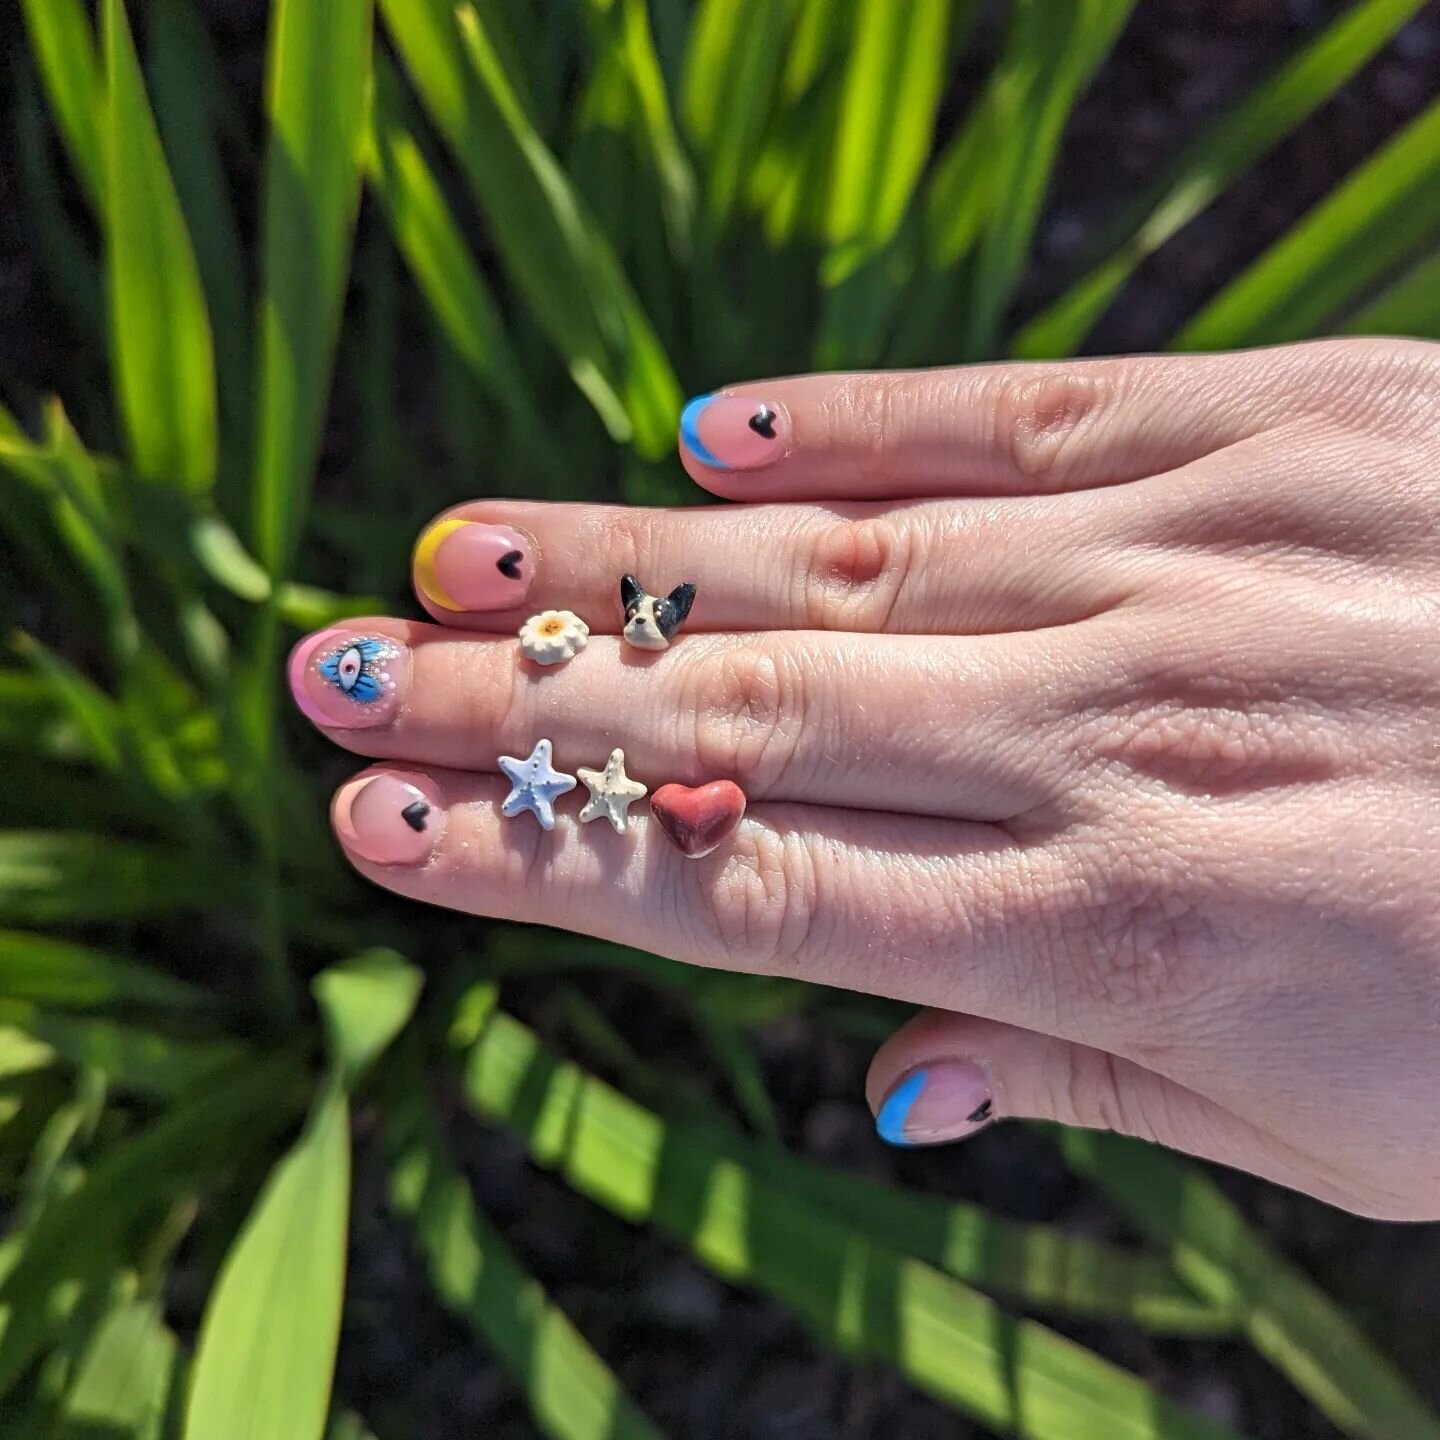 🌱Anyone else wanting it to be spring already?!?! 🌺We want colour and those long nights of fun.
Nails done by the fab @nailsbyambergreen 💅
.
.
.
#jewelry #handmadejewelry #ceramicjewelry #madeinbc
#jewelryaddict #locallymade #shoplocal #canadianmad